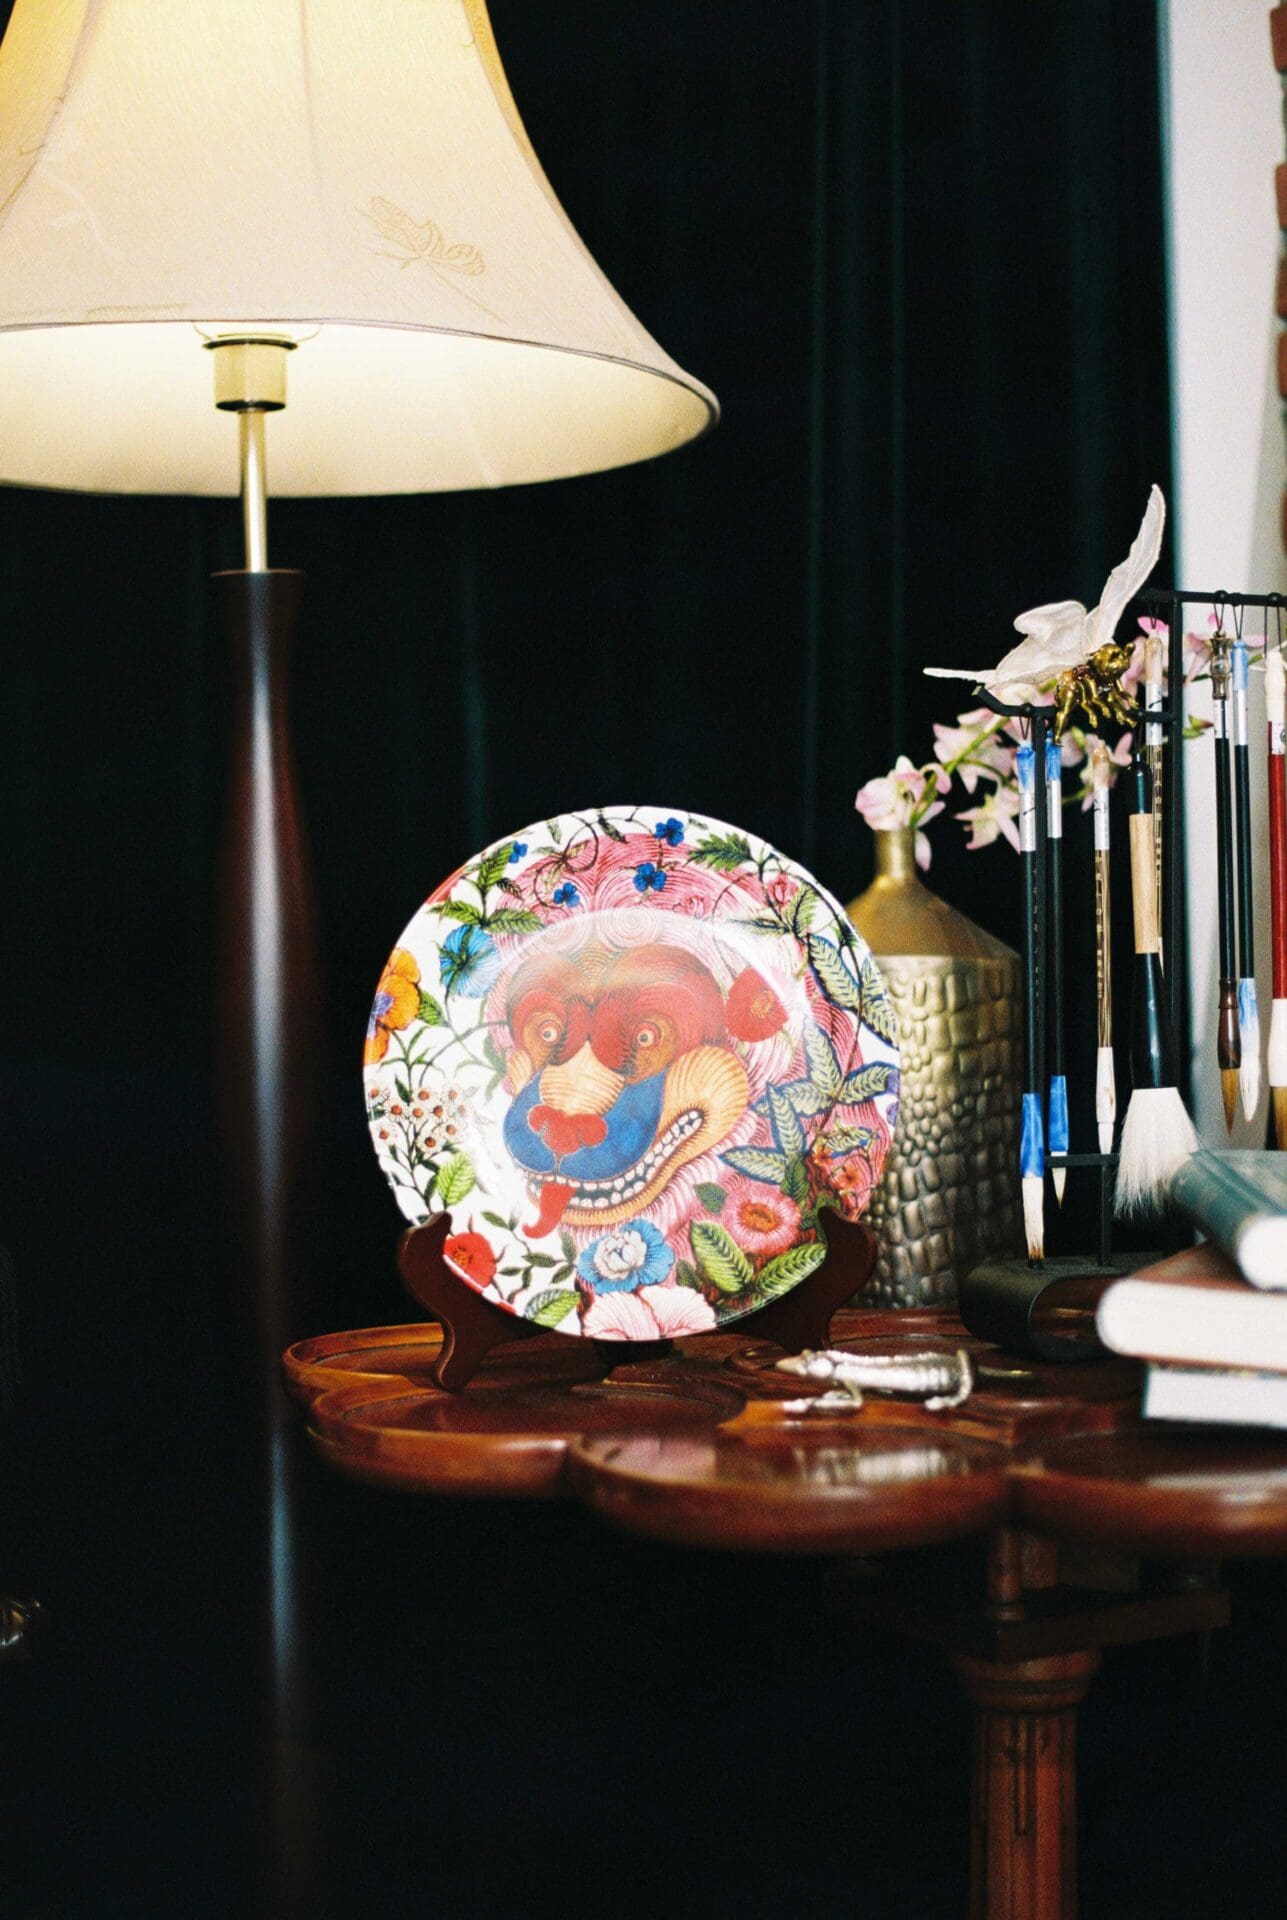 Phannapast | A multi-coloured patterned china plate is displayed on a dark wood table, in front of a darkly coloured wall and next to an vintage-style floor lamp with large lampshade